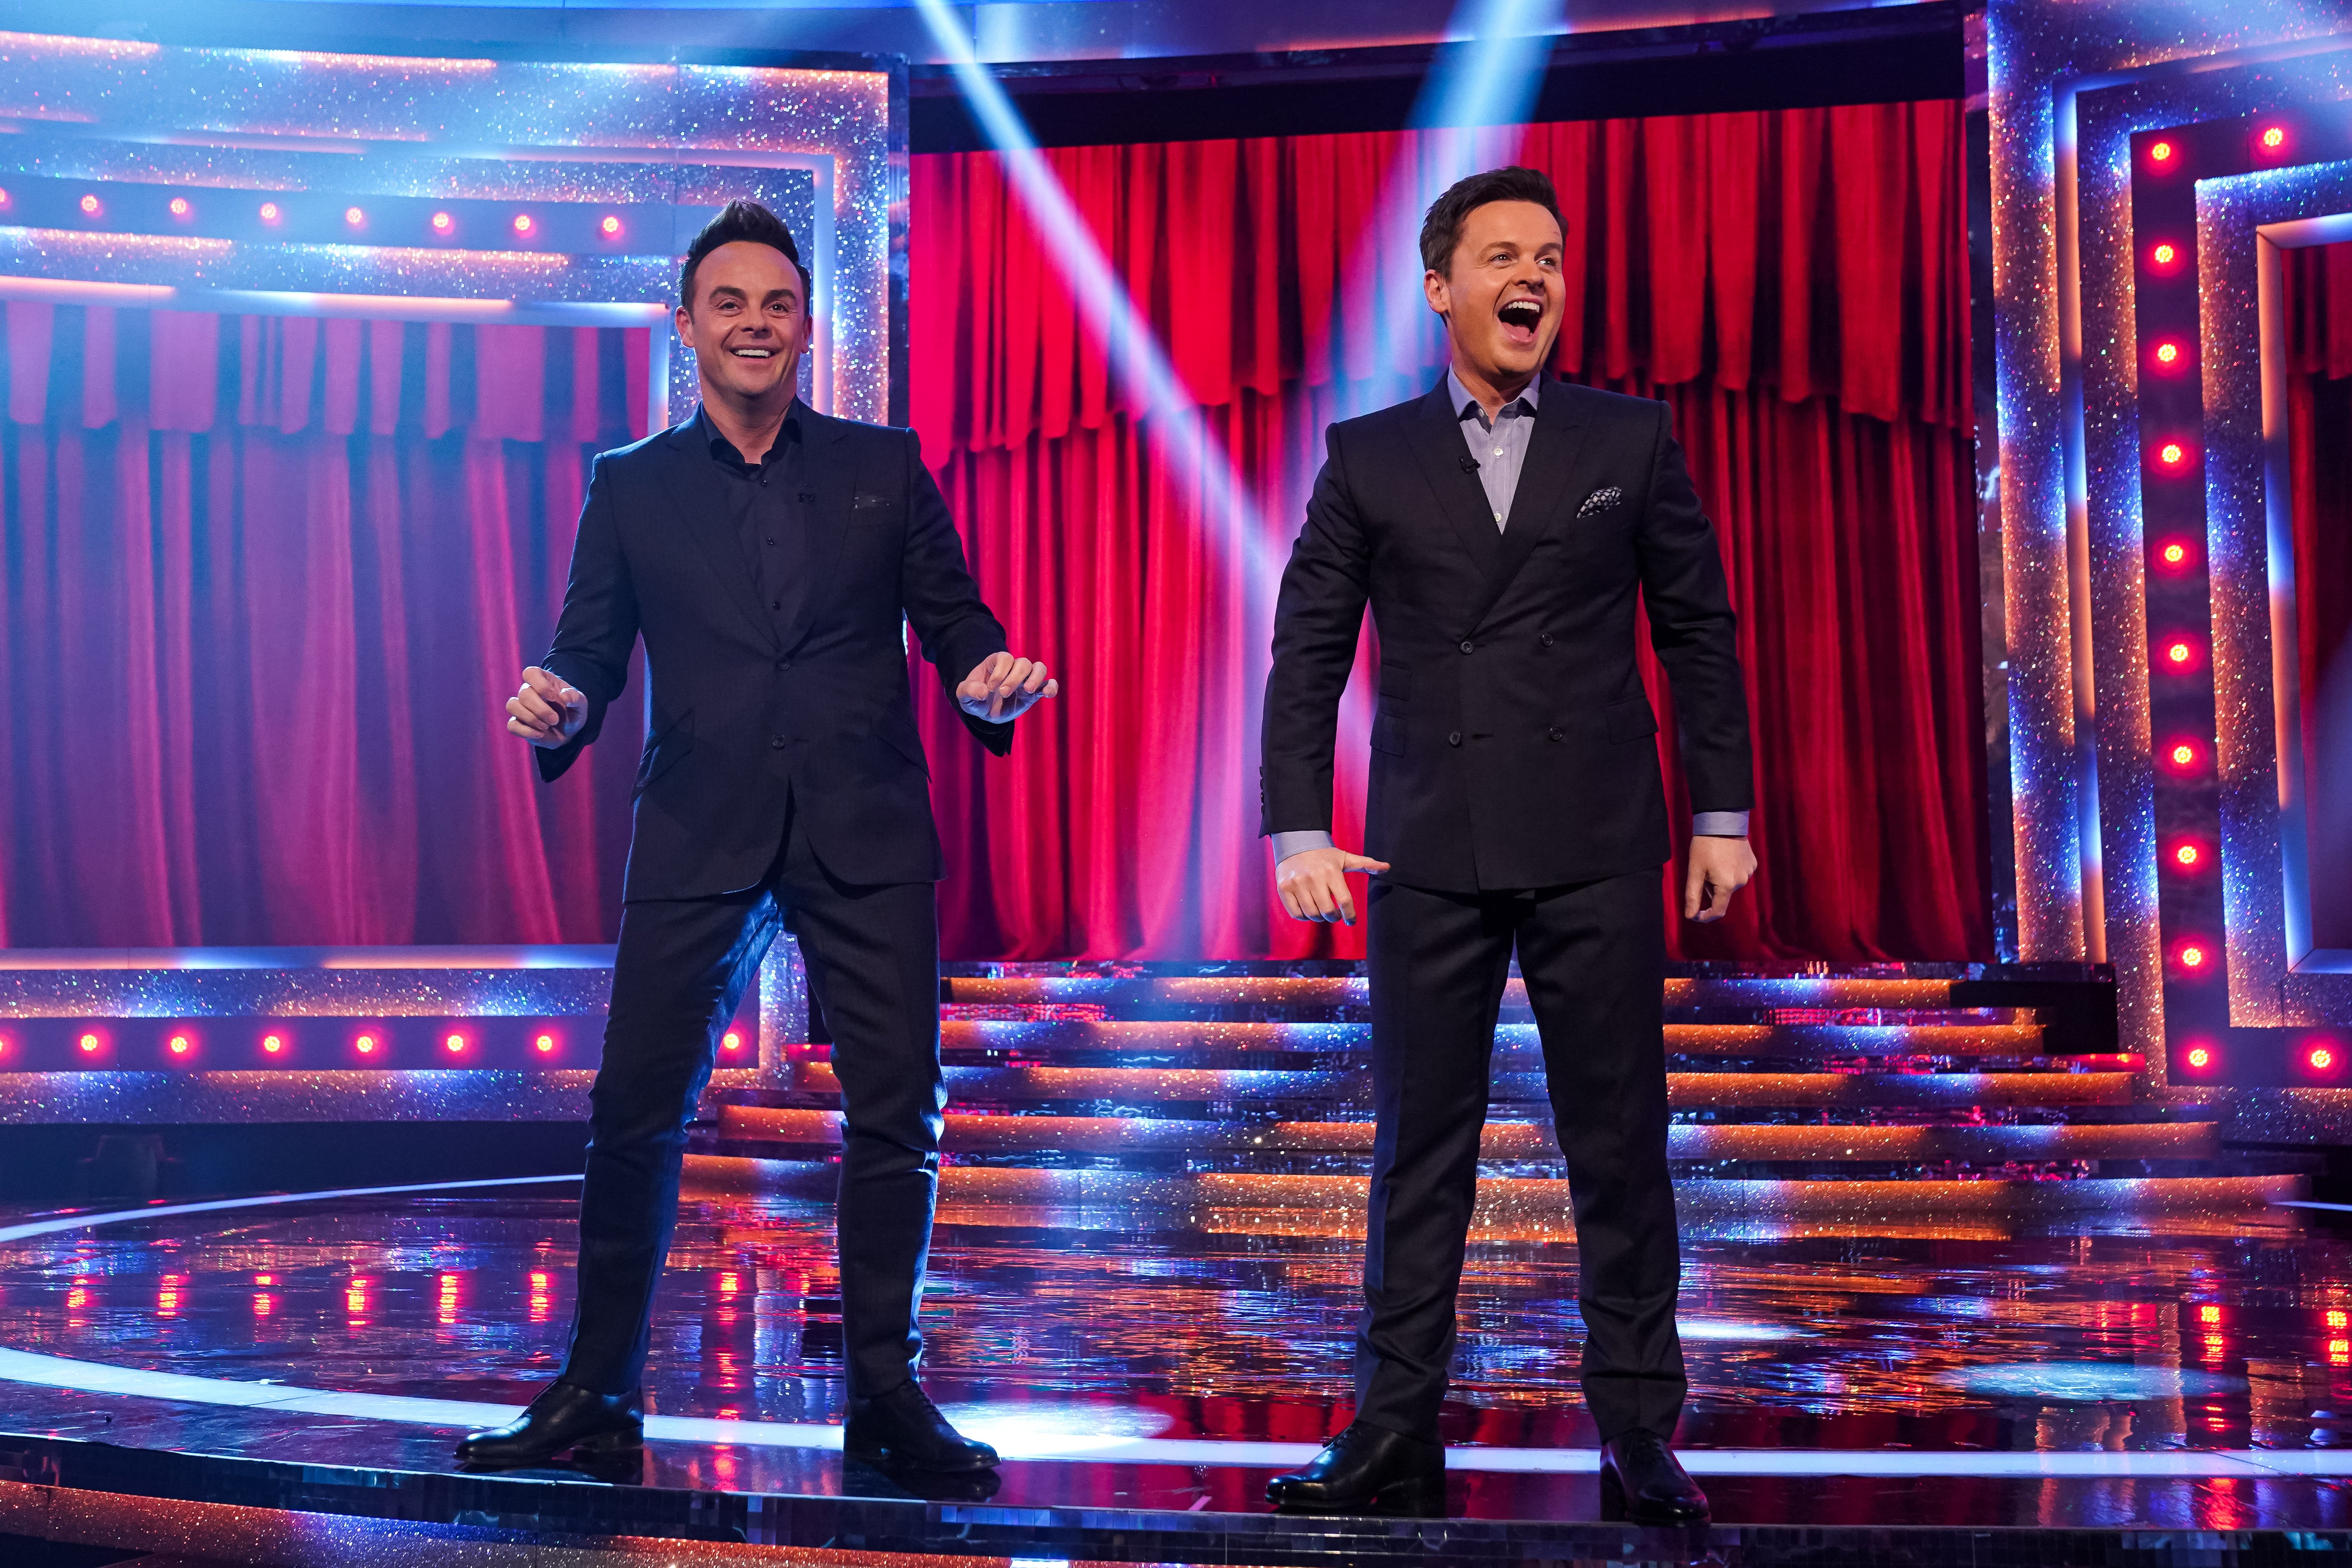 Ant and Dec have been fronting the shiny-floored show since 2002